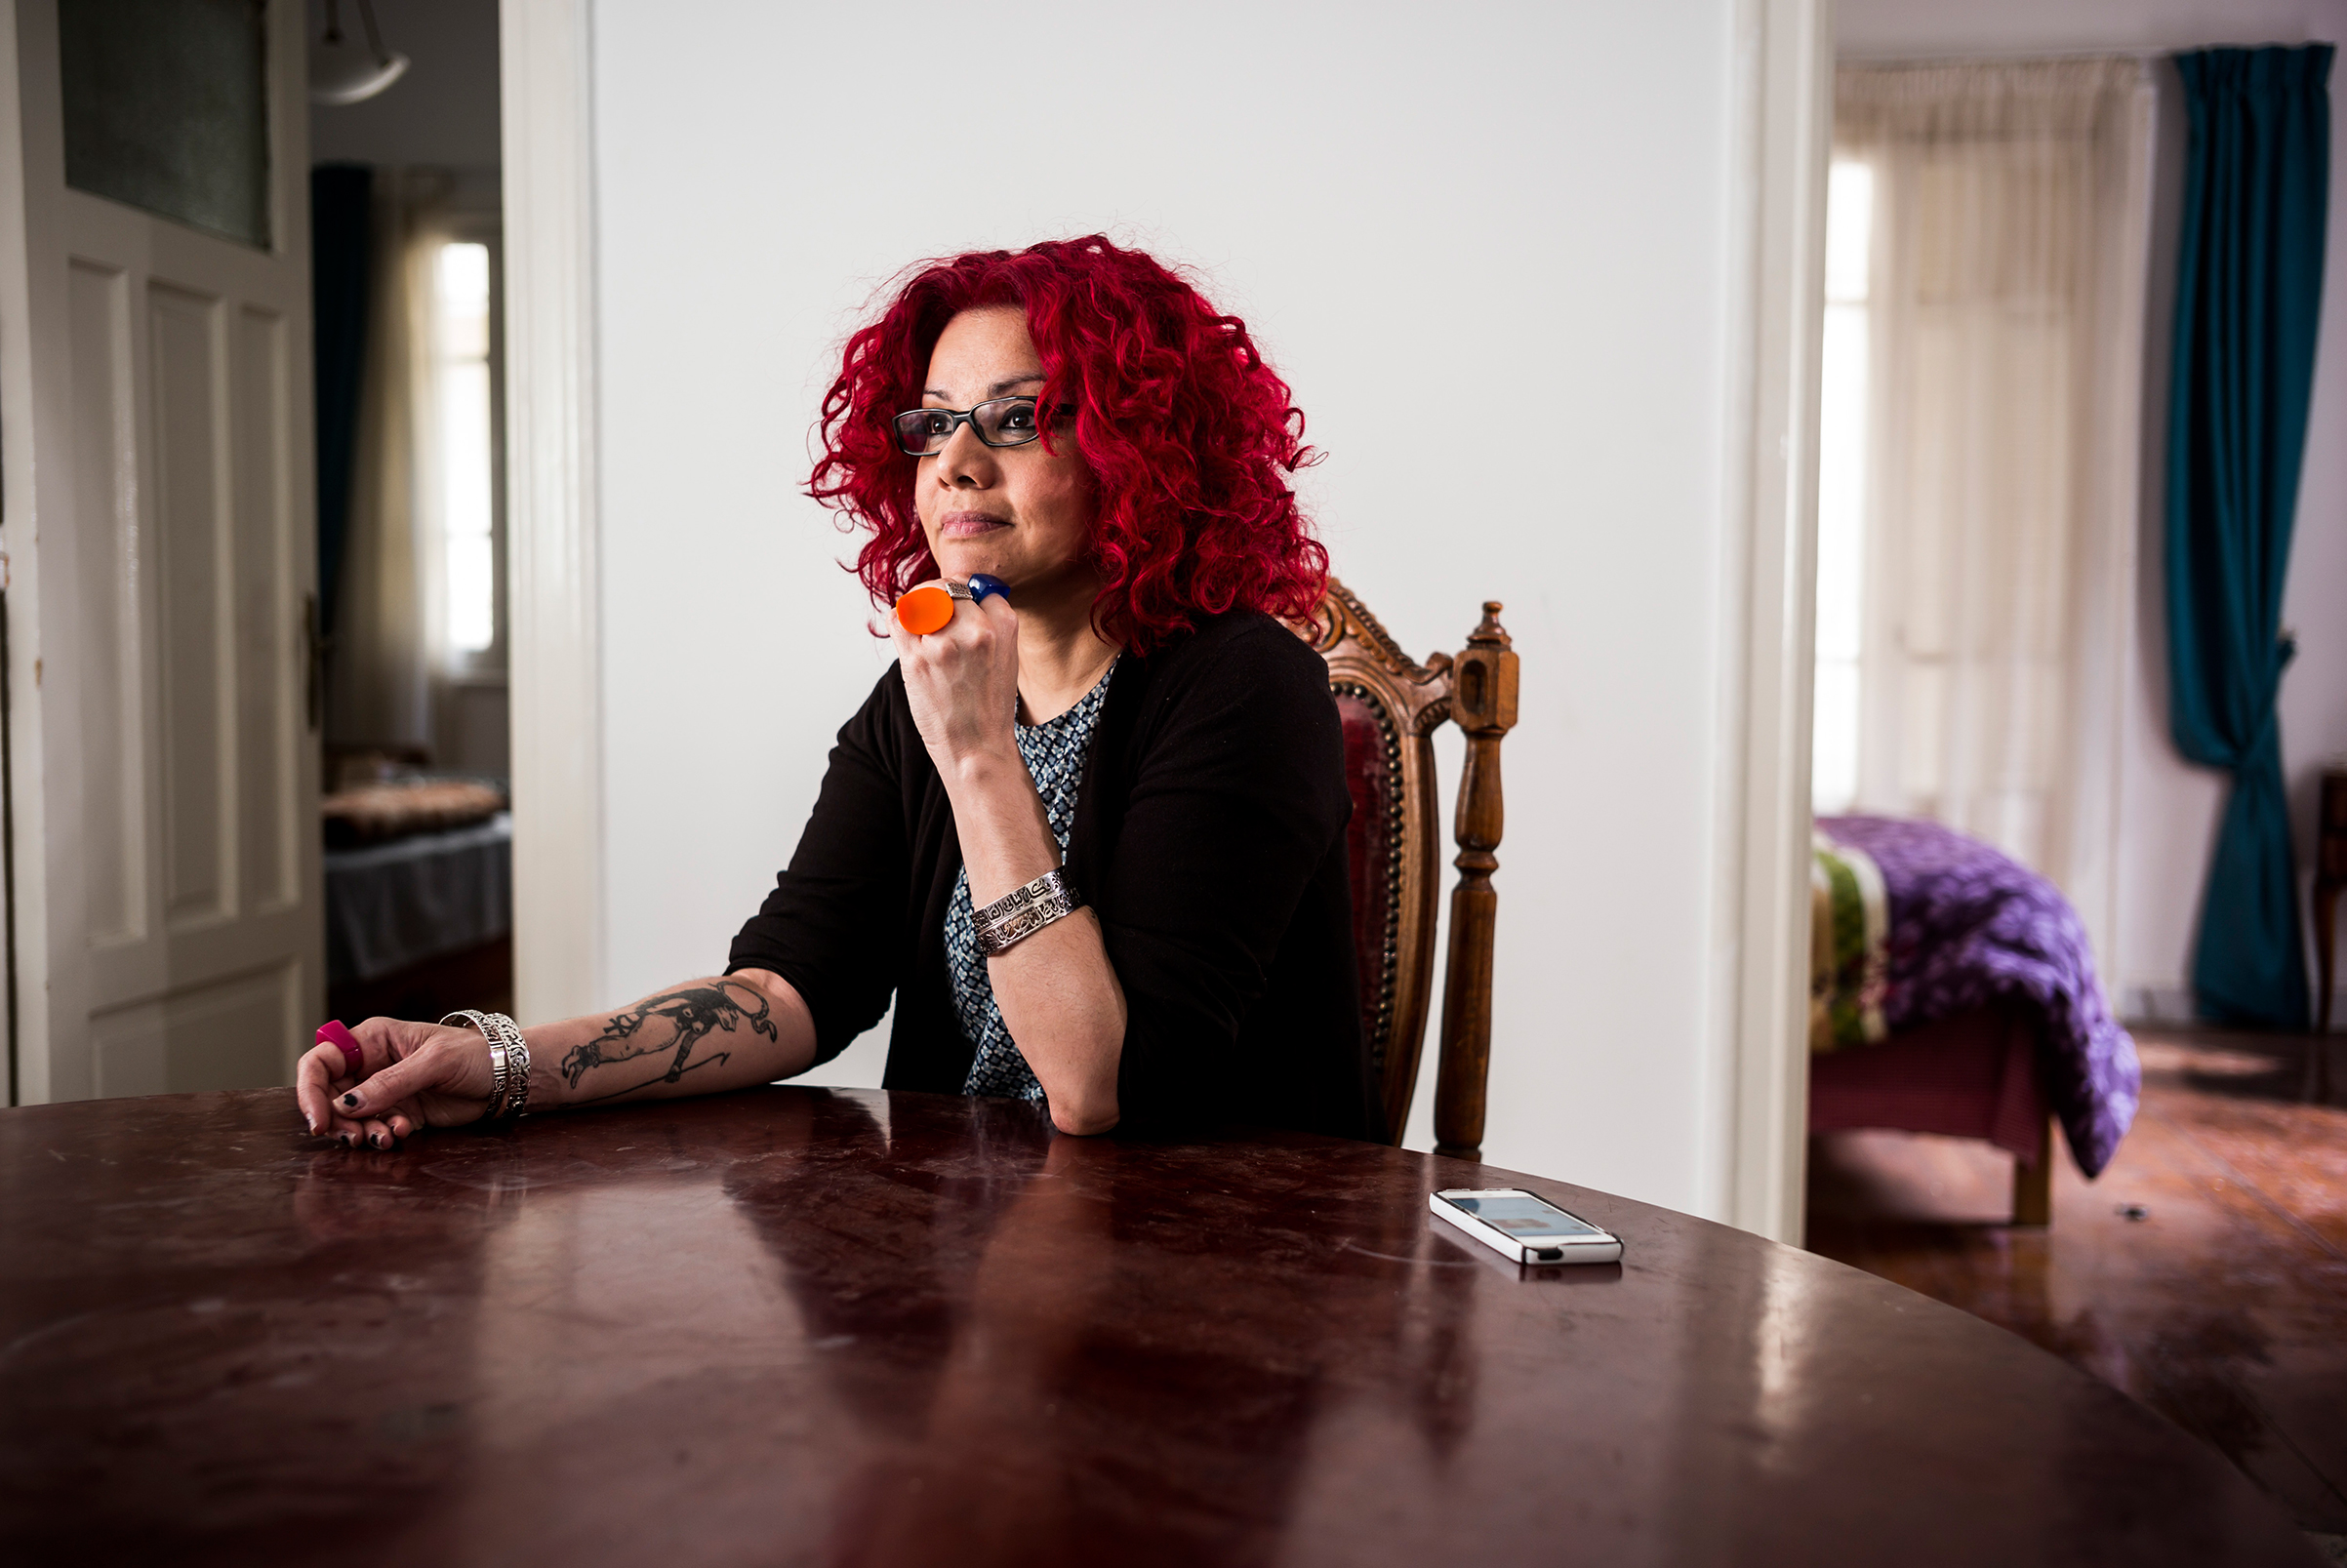 Mona Eltahawy is an Egyptian author publishing a new book "Headscarves and Hymens: Why the Middle East Needs a Sexual Revolution" photographed in her home on April 12, 2015 in  Cairo. (David Degner—Getty Images)